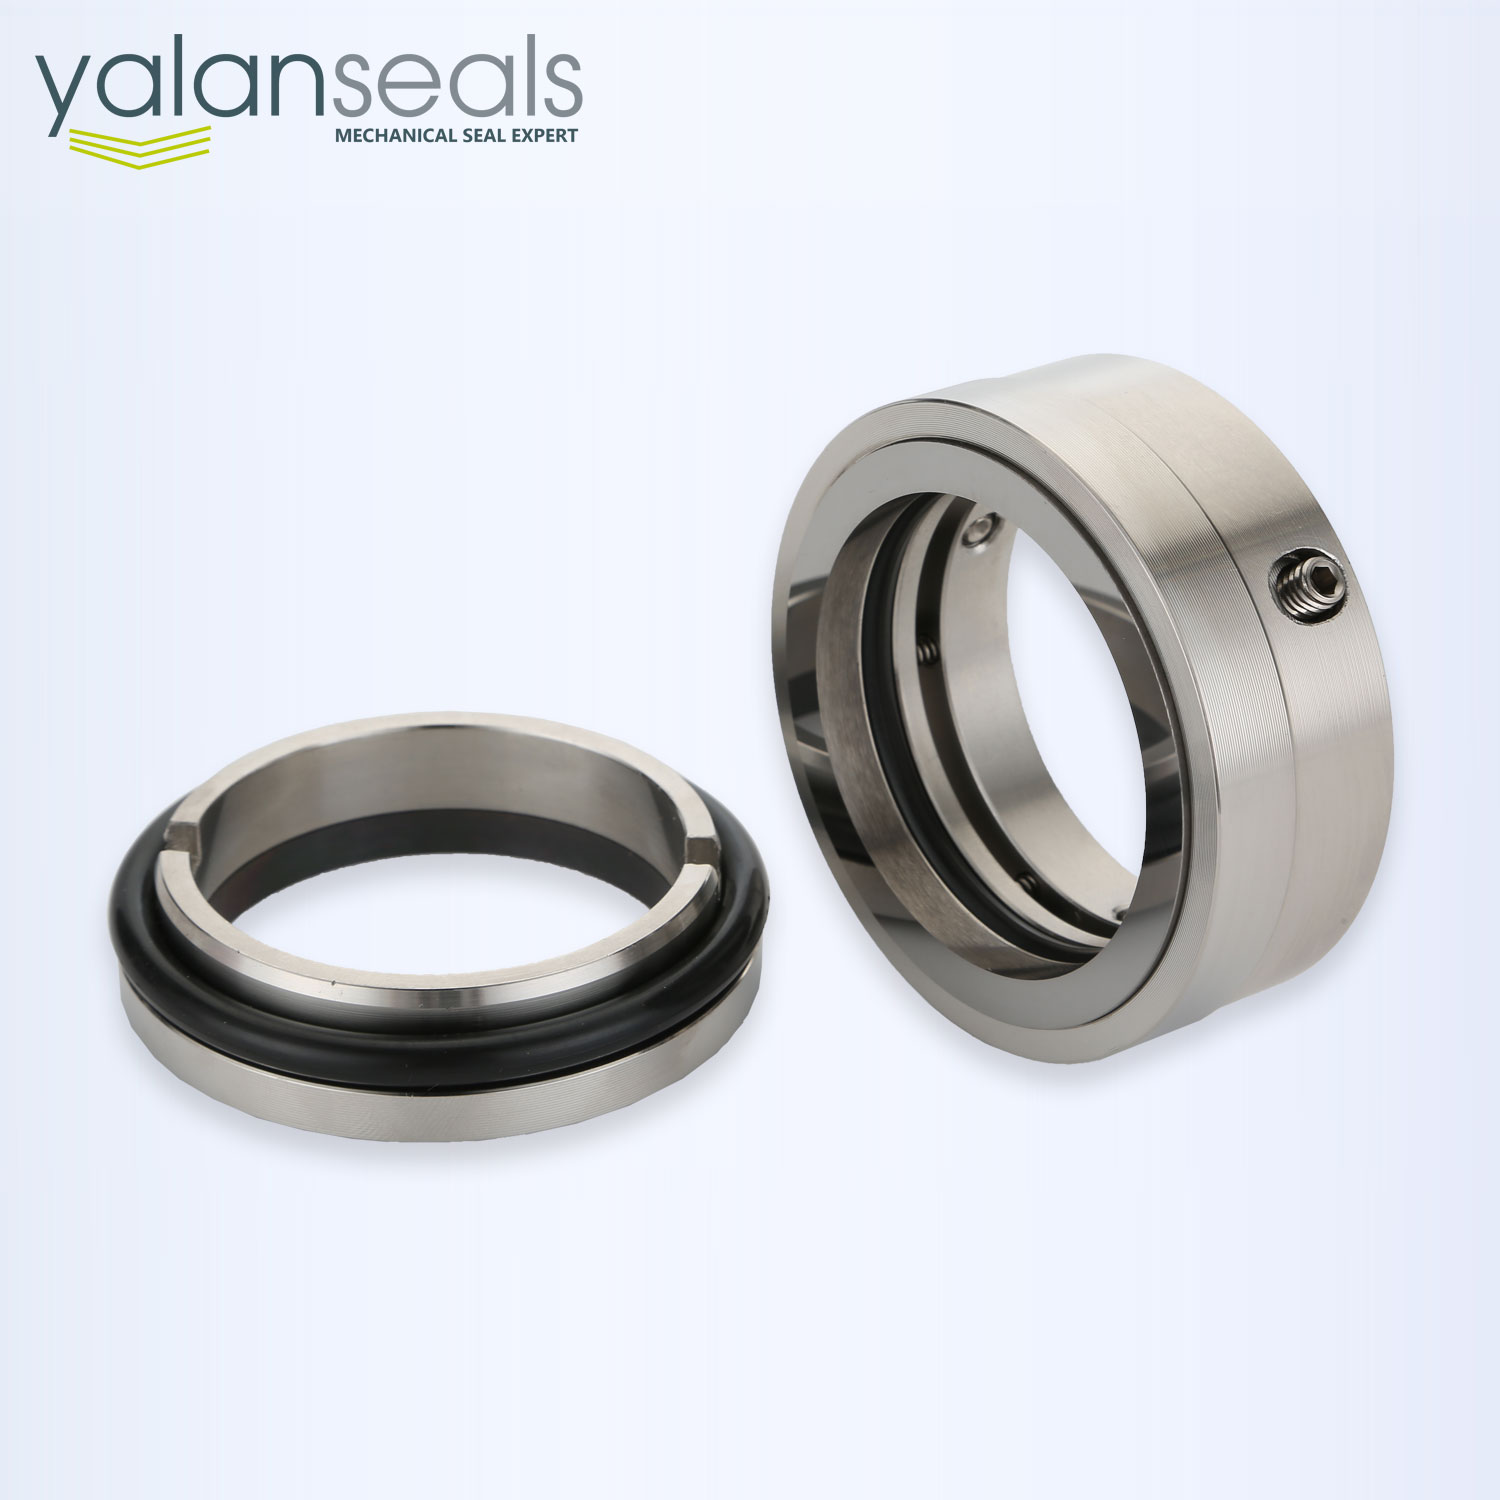 M524-2 Mechanical Seal for Immersible Pumps